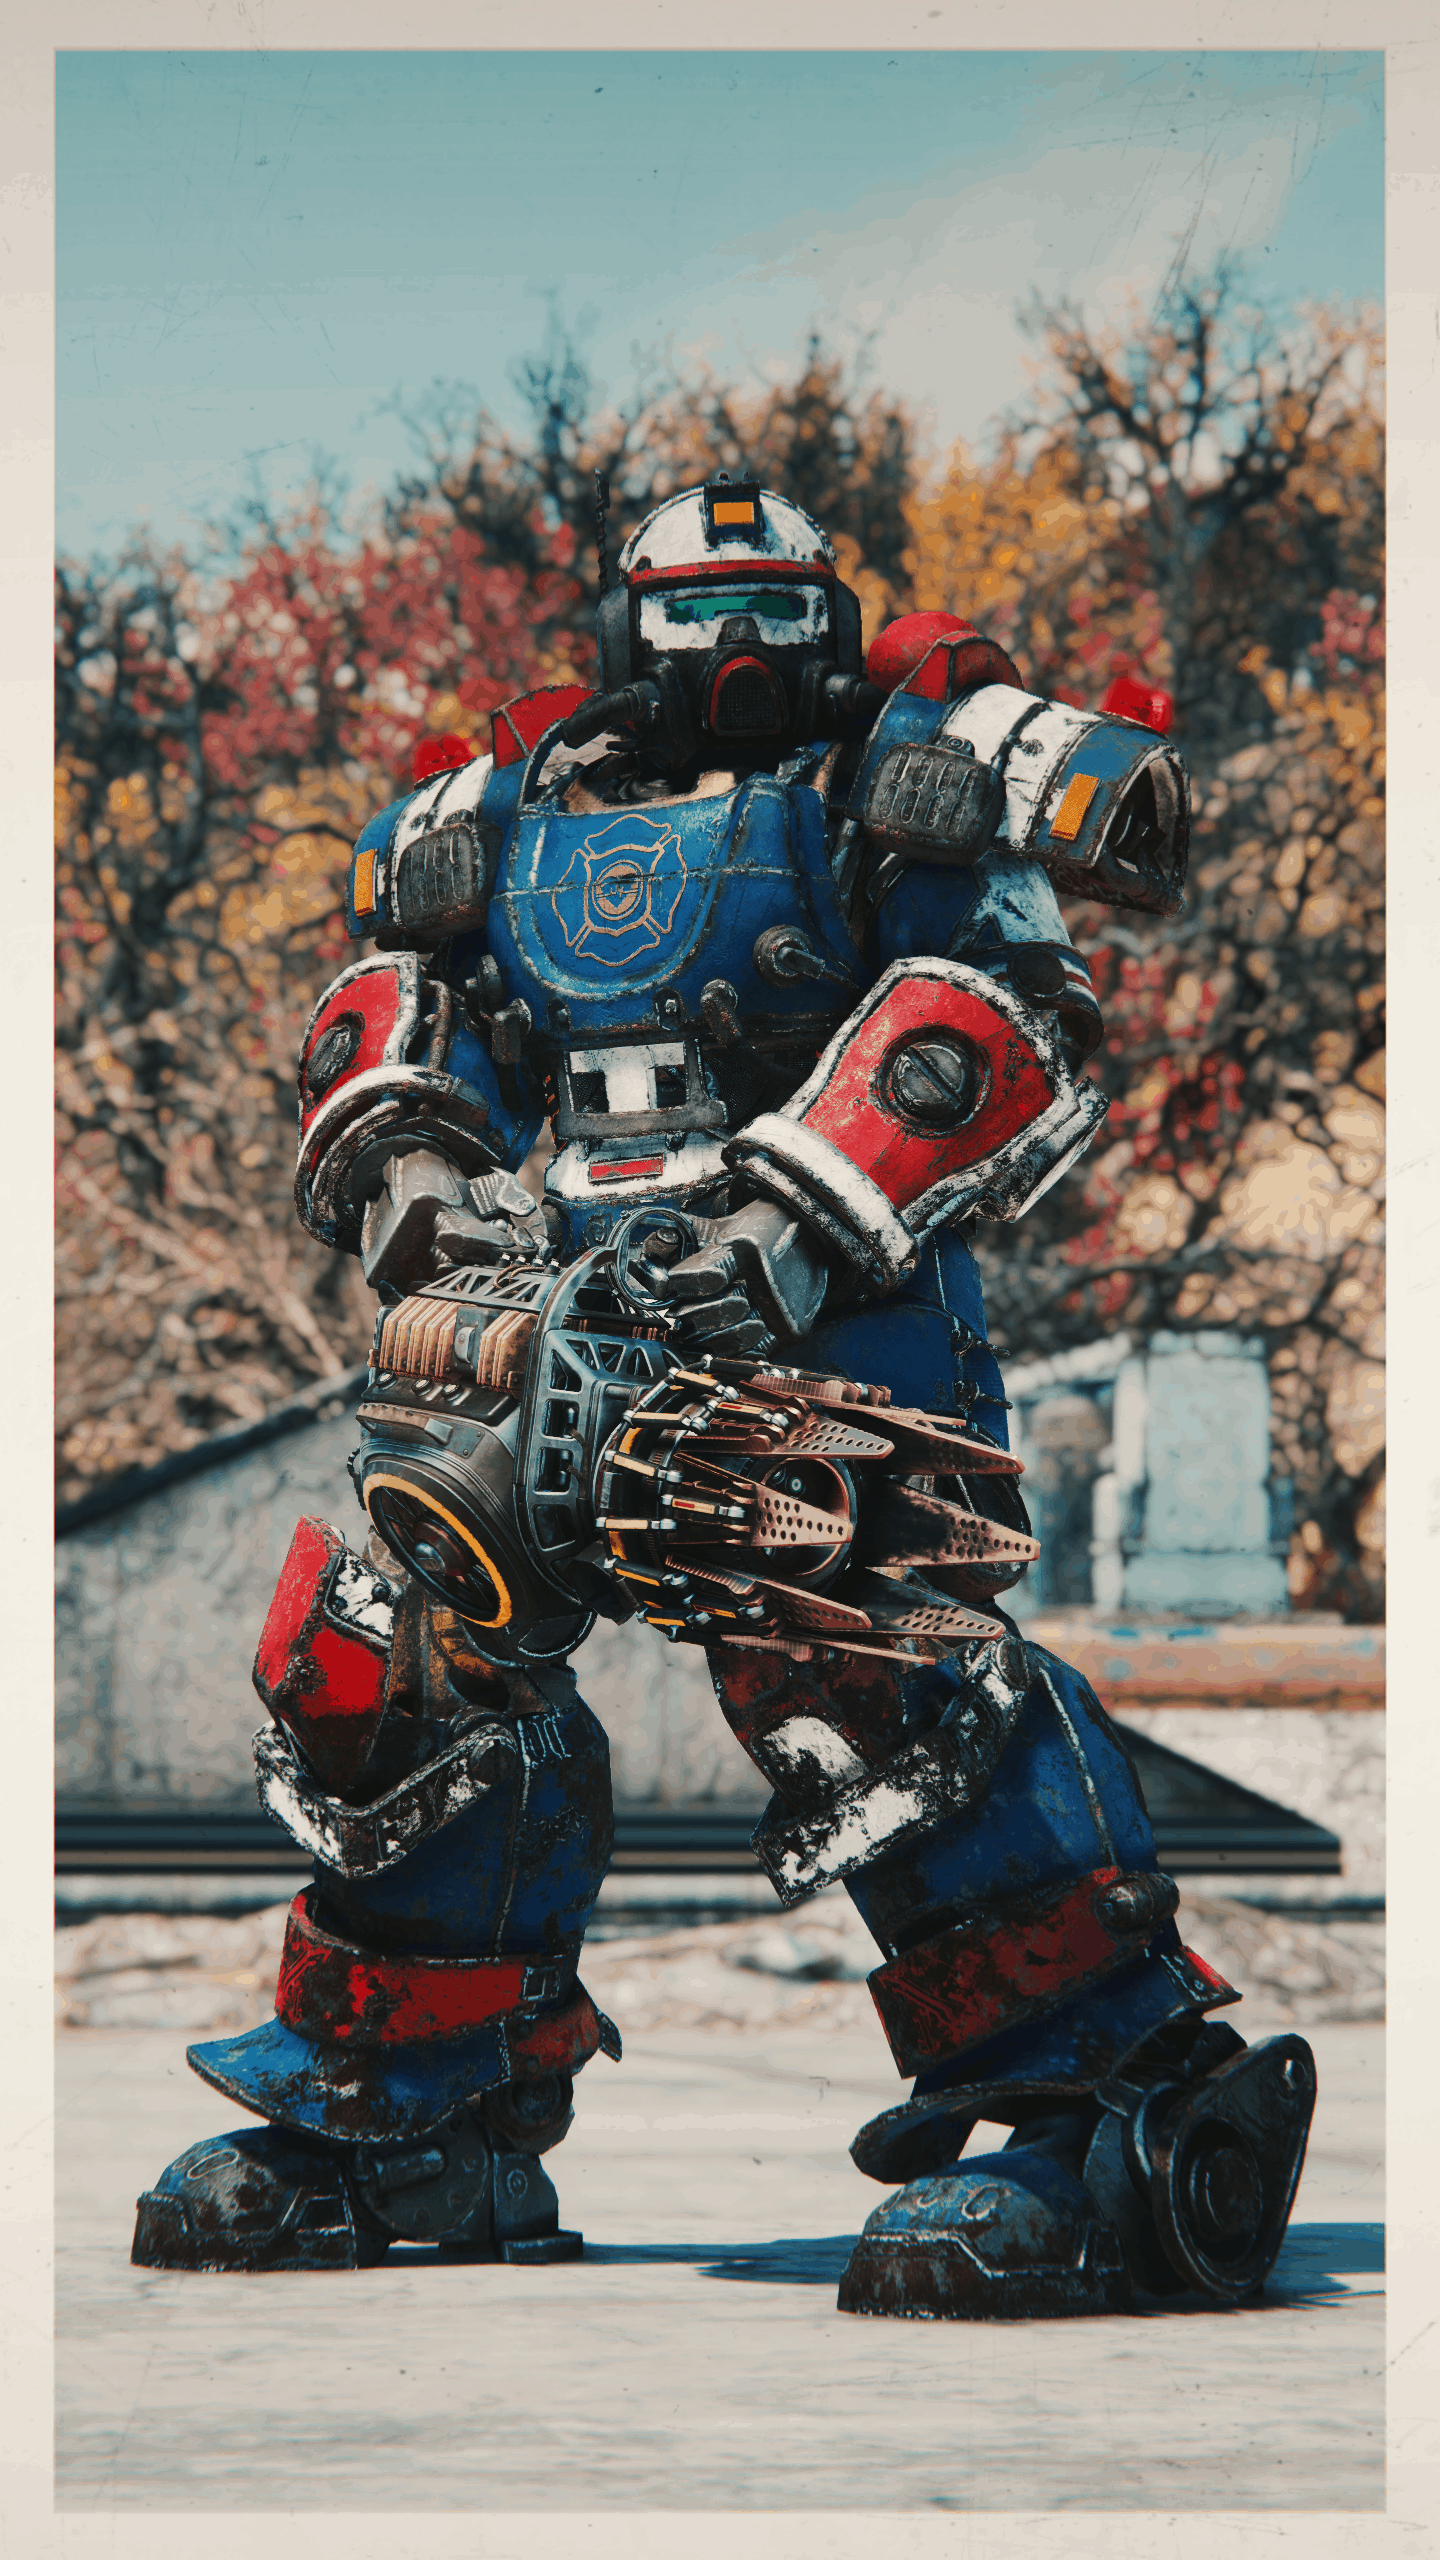 Responders Power Armor Retexture Revamped - Fallout 76 Mod download